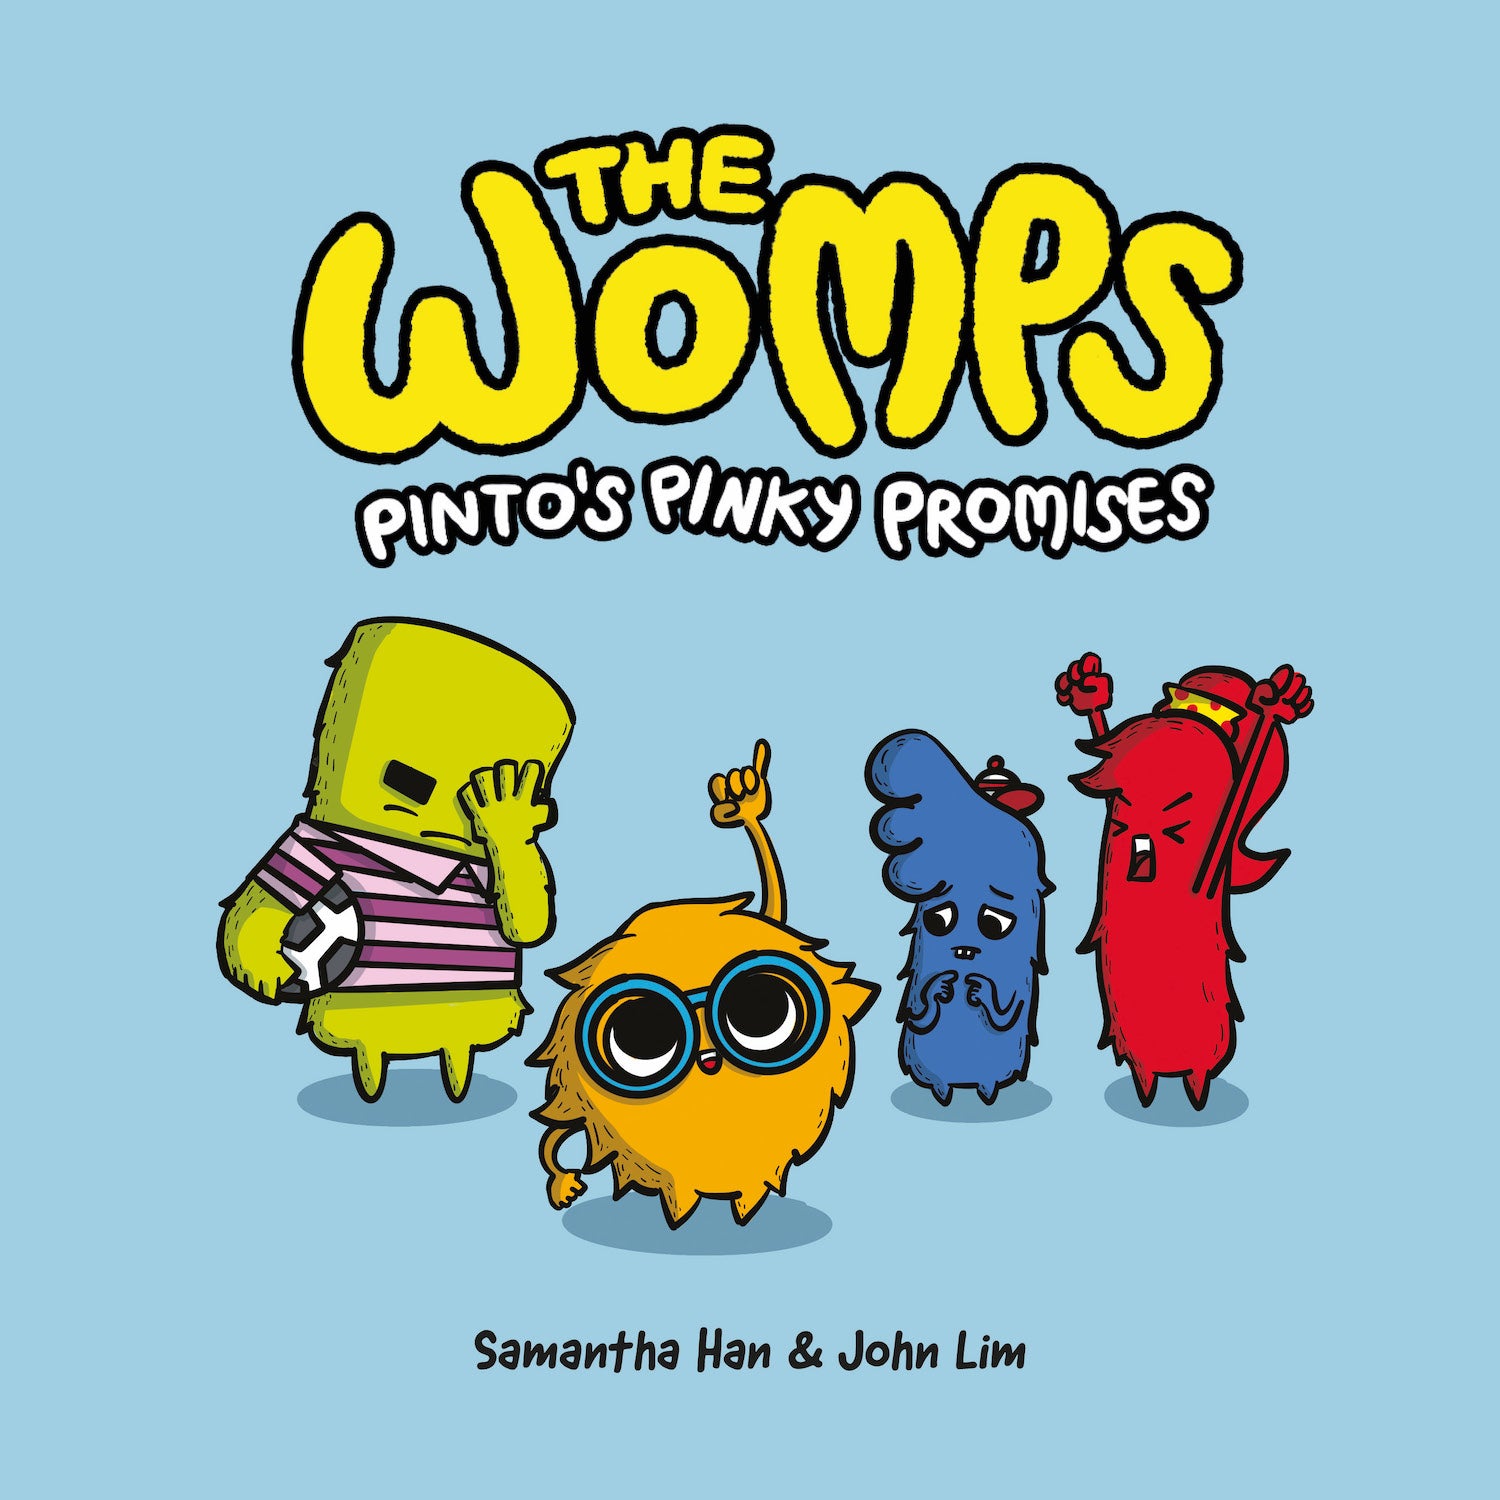 The Womps: Pinto’s Pinky Promises (book 1)